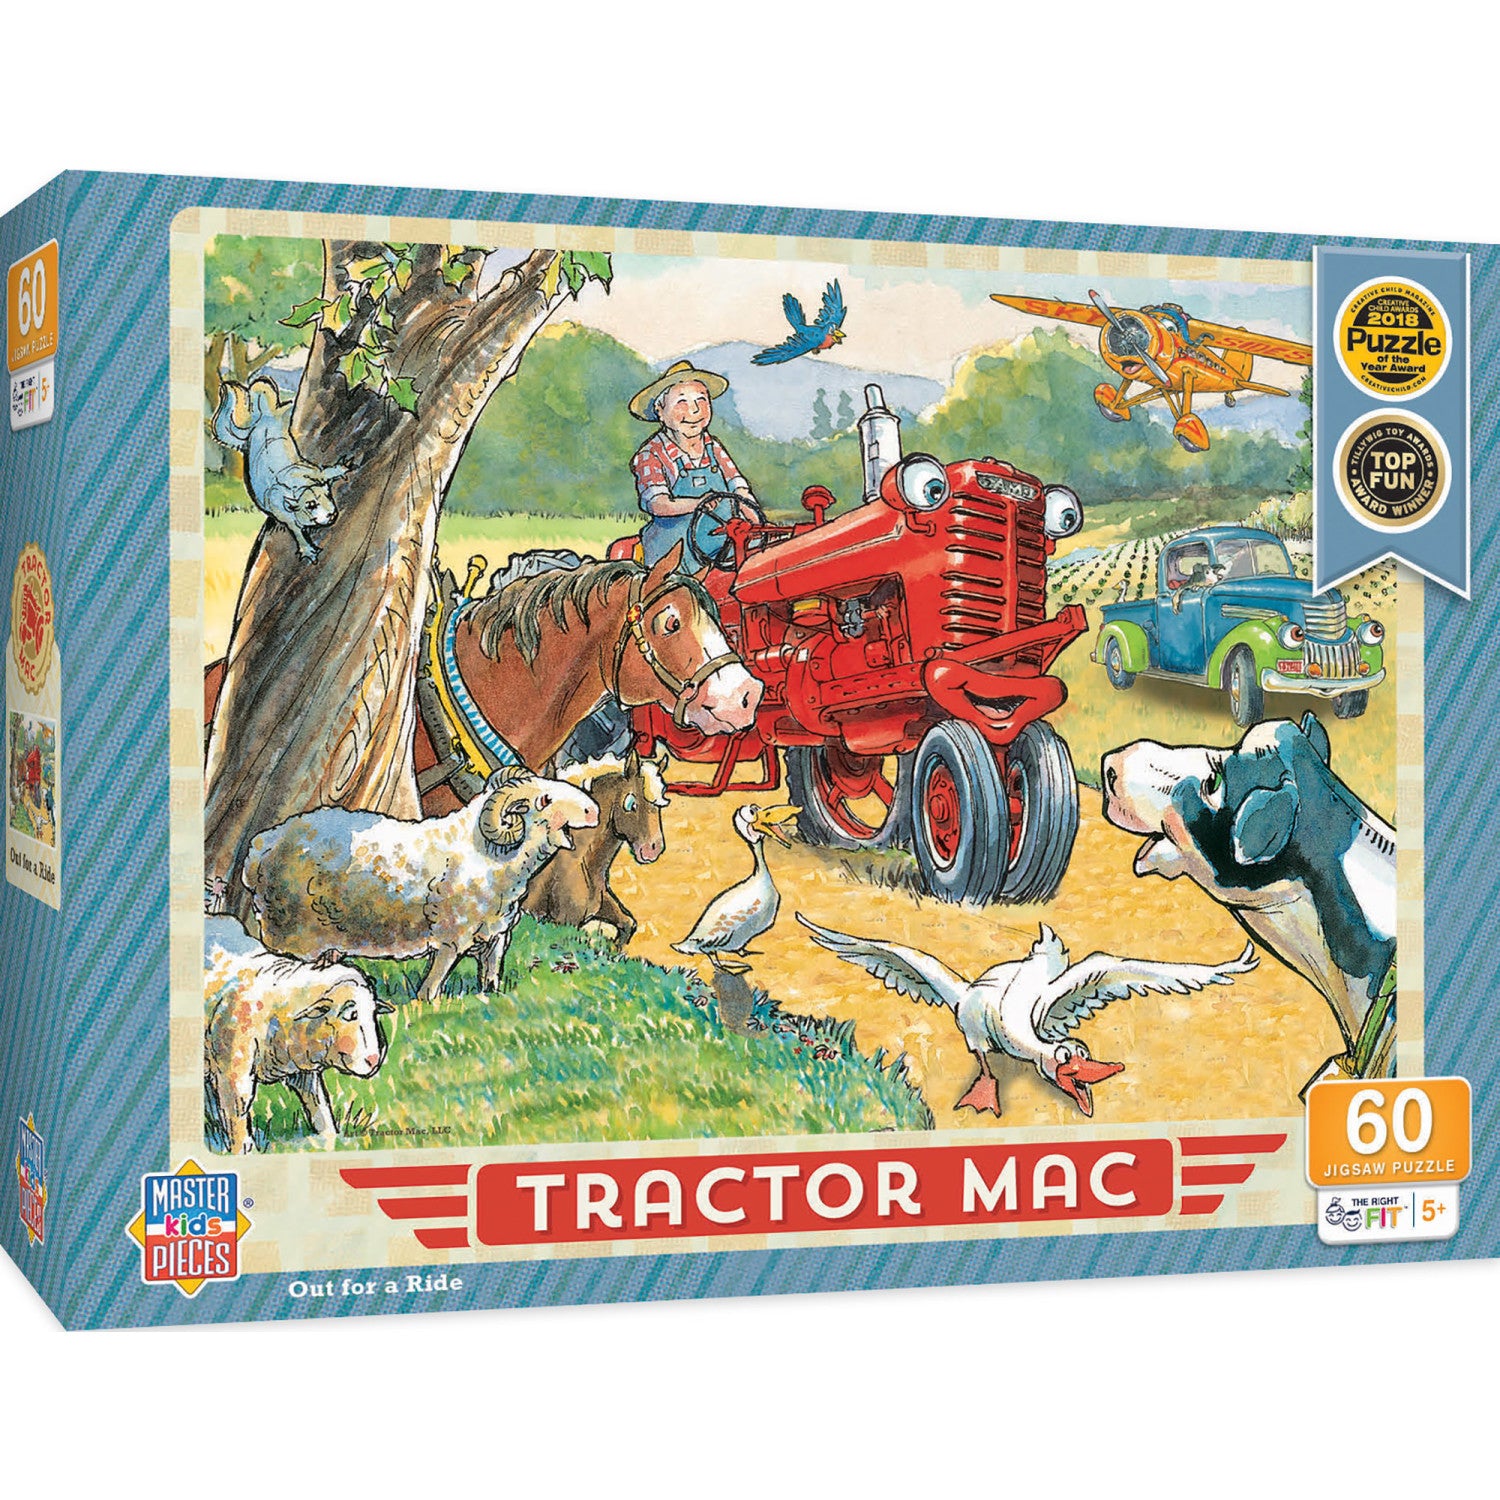 Tractor Mac - Out for a Ride 60 Piece Kids Puzzle